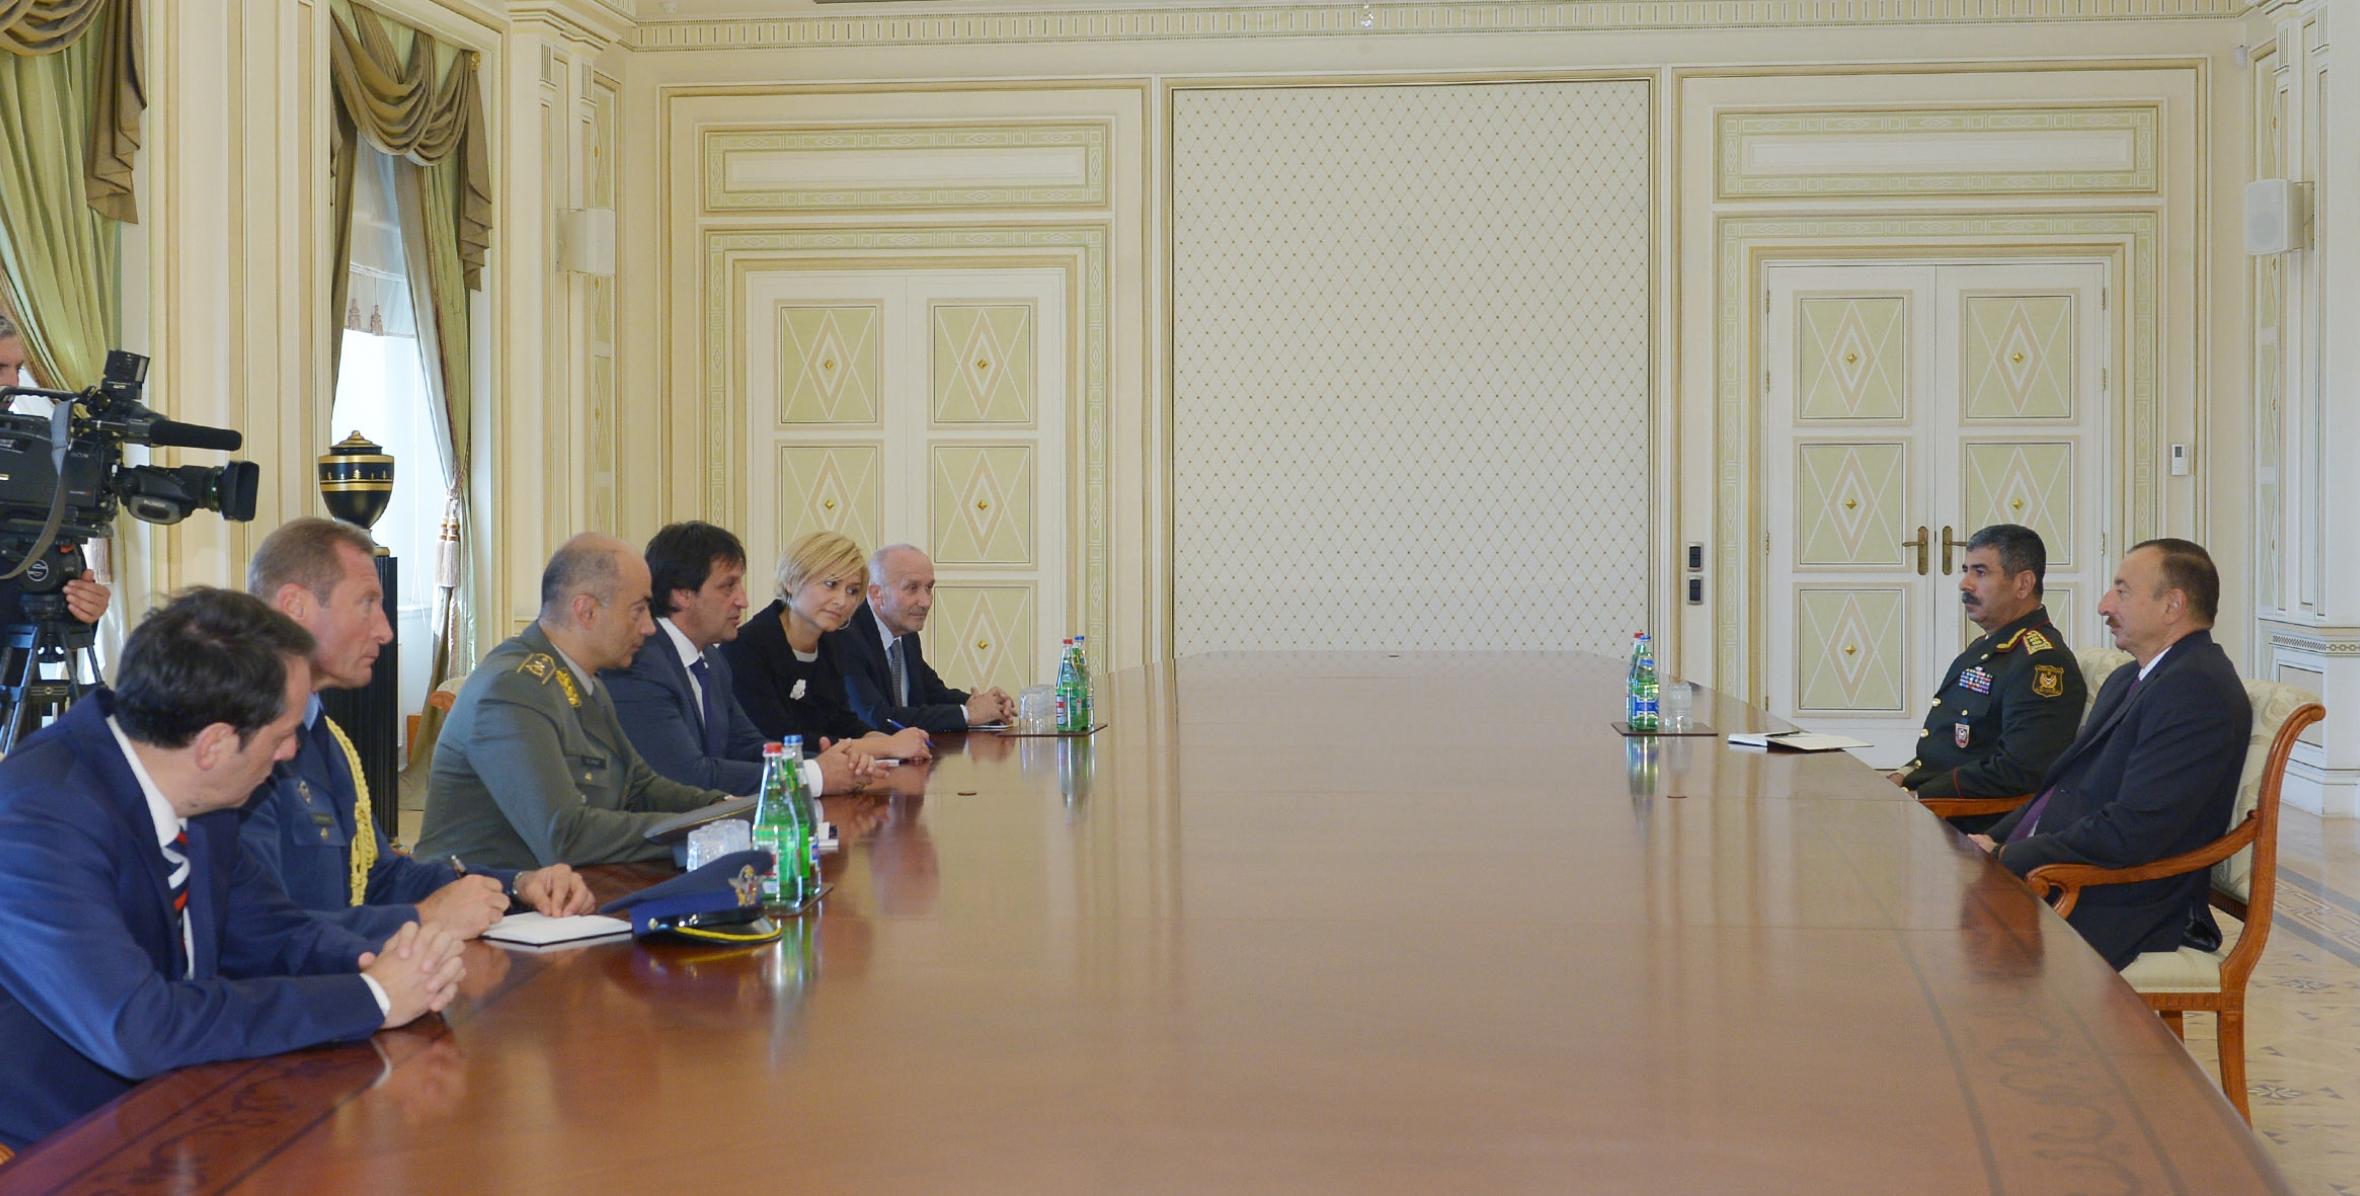 Ilham Aliyev received a delegation led by the Serbian Defense Minister